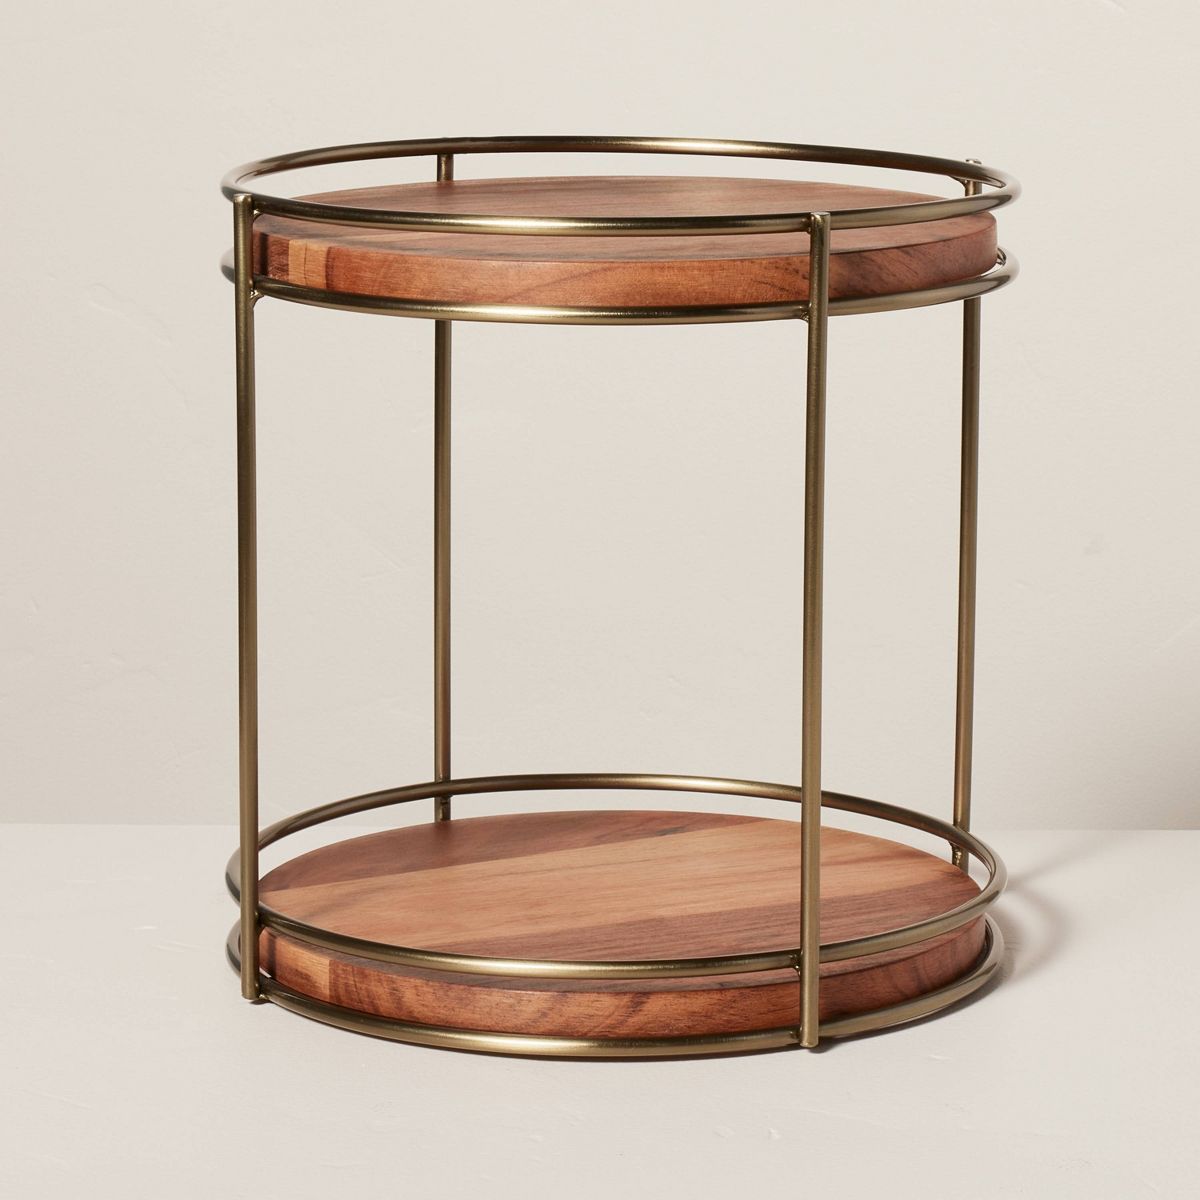 Tiered Wood & Metal Round Serving Stand Brass/Brown - Hearth & Hand™ with Magnolia | Target